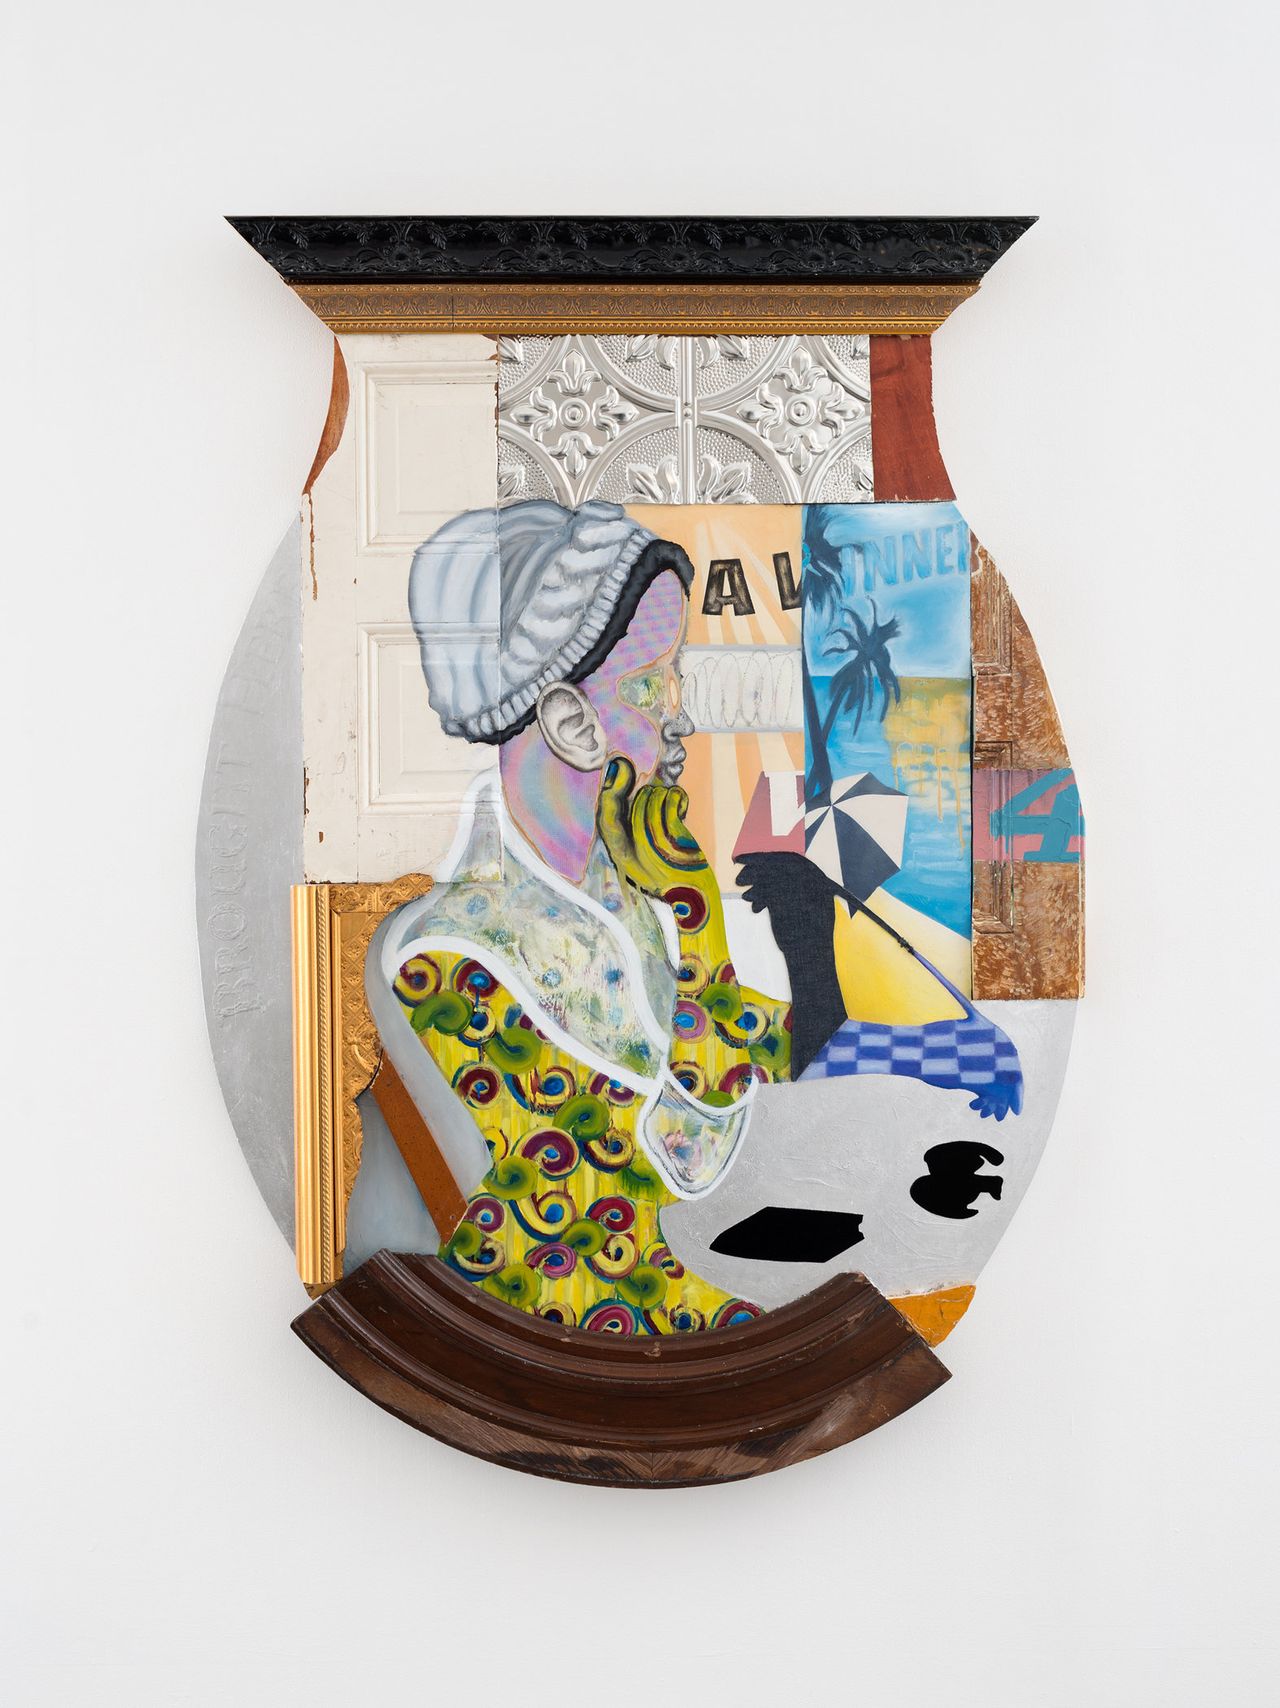 David Shrobe, "Ear to the Streets," 2017, oil, graphite, spray paint, wood, frame moldings, silver leaf, and mixed media, 67 x 48 x 2 inches